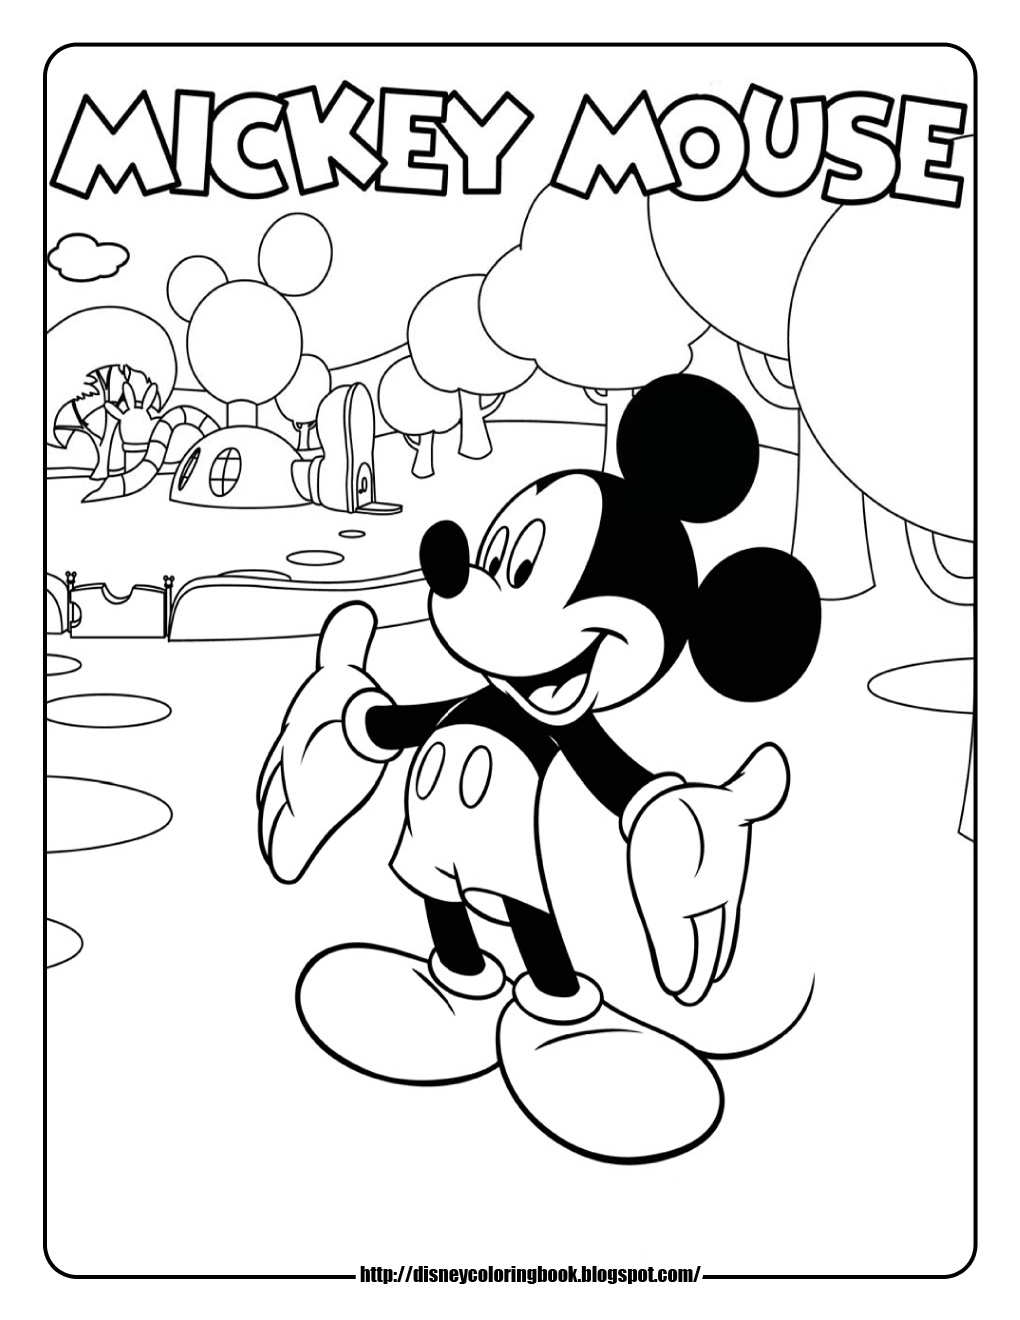 coloring pages mickey mouse clubhouse disney coloring pages and sheets for kids mickey mouse pages coloring mouse clubhouse mickey 